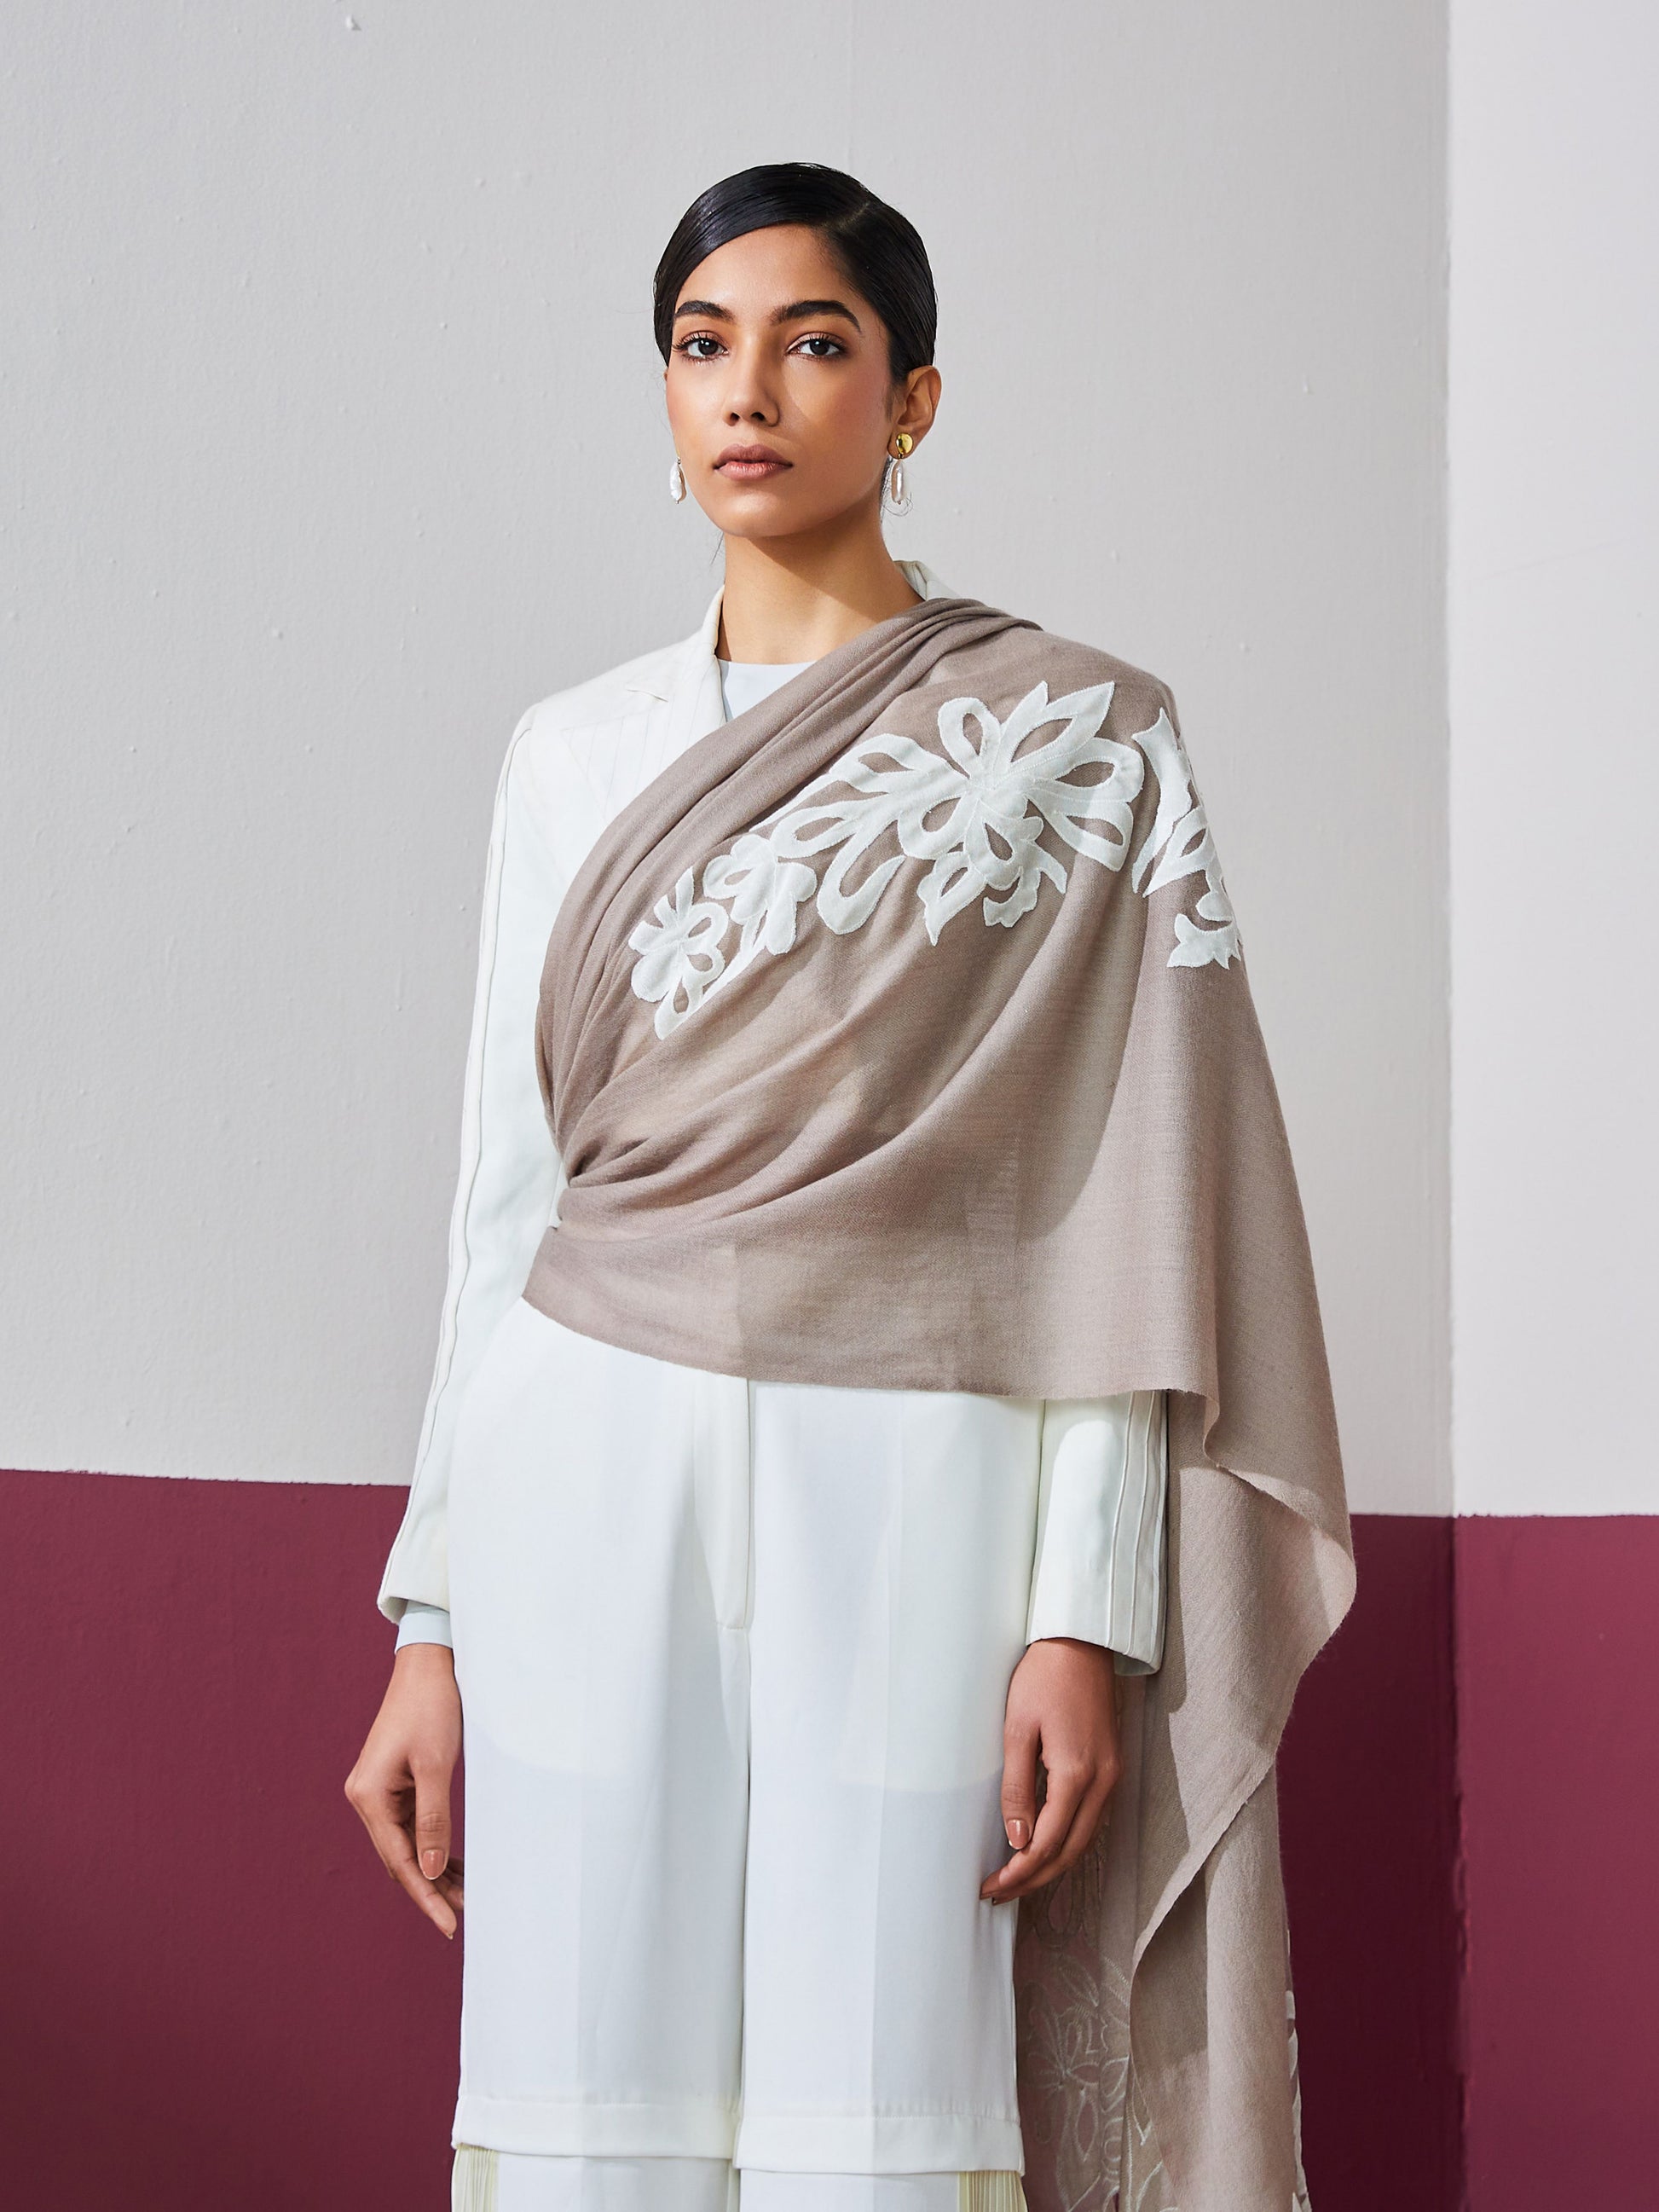 Model is wearing a brown Velvel affair cashmere stole with white applique from Shaza.